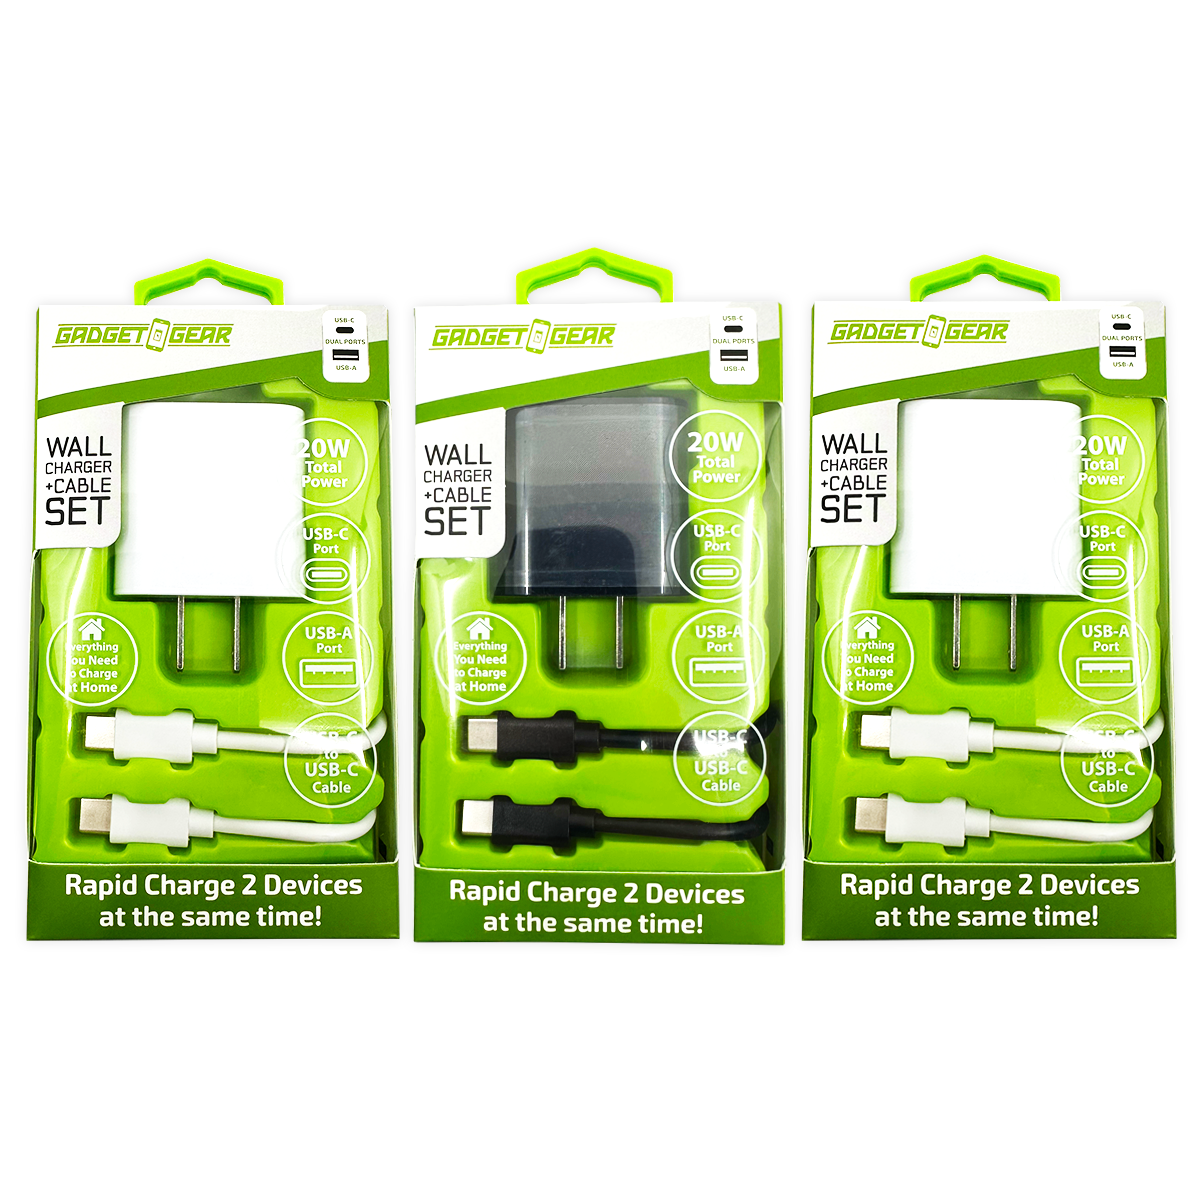 AC Wall Charger Dual USB / USB-C Ports with USB-C to USB-C Charging Cable Set 20 Watts - 3 Pieces Per Set 24628